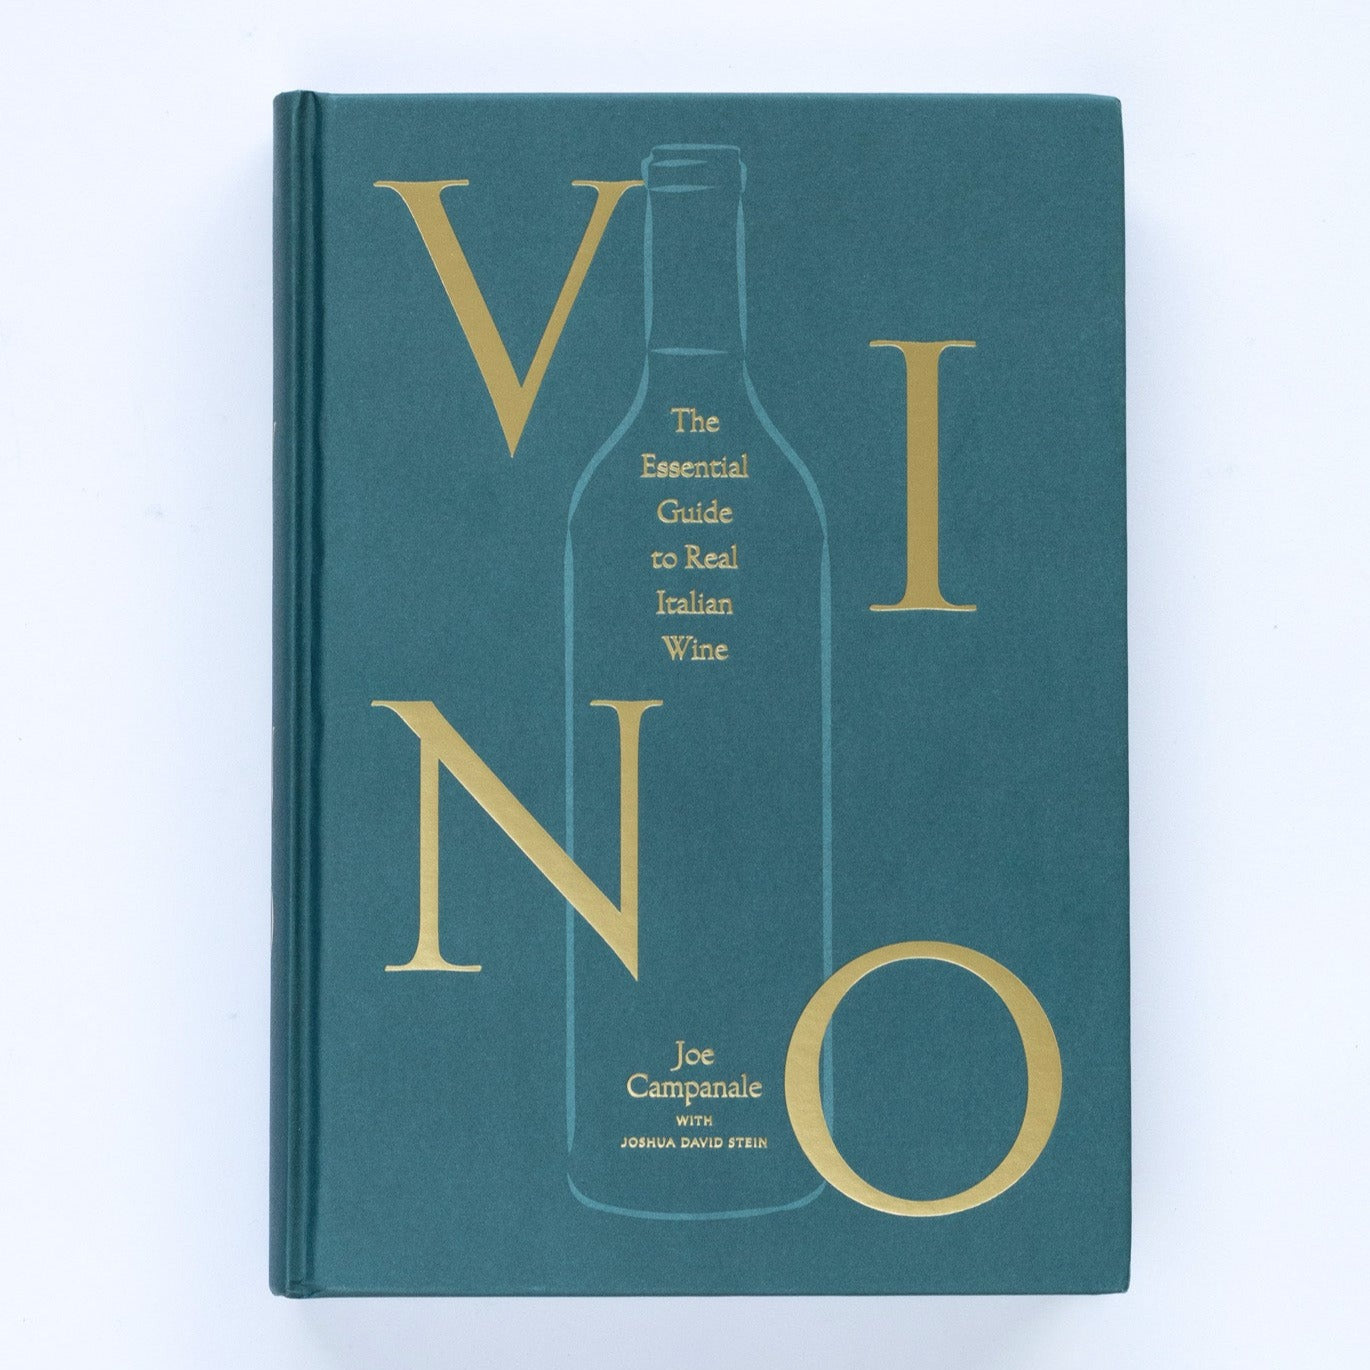 A blue green hardcover, linen wrapped book with light green illustration of wine bottle in middle and gold embossed text that reads, "Vino: The Essential Guide to Real Italian Wine" photographed on white background.